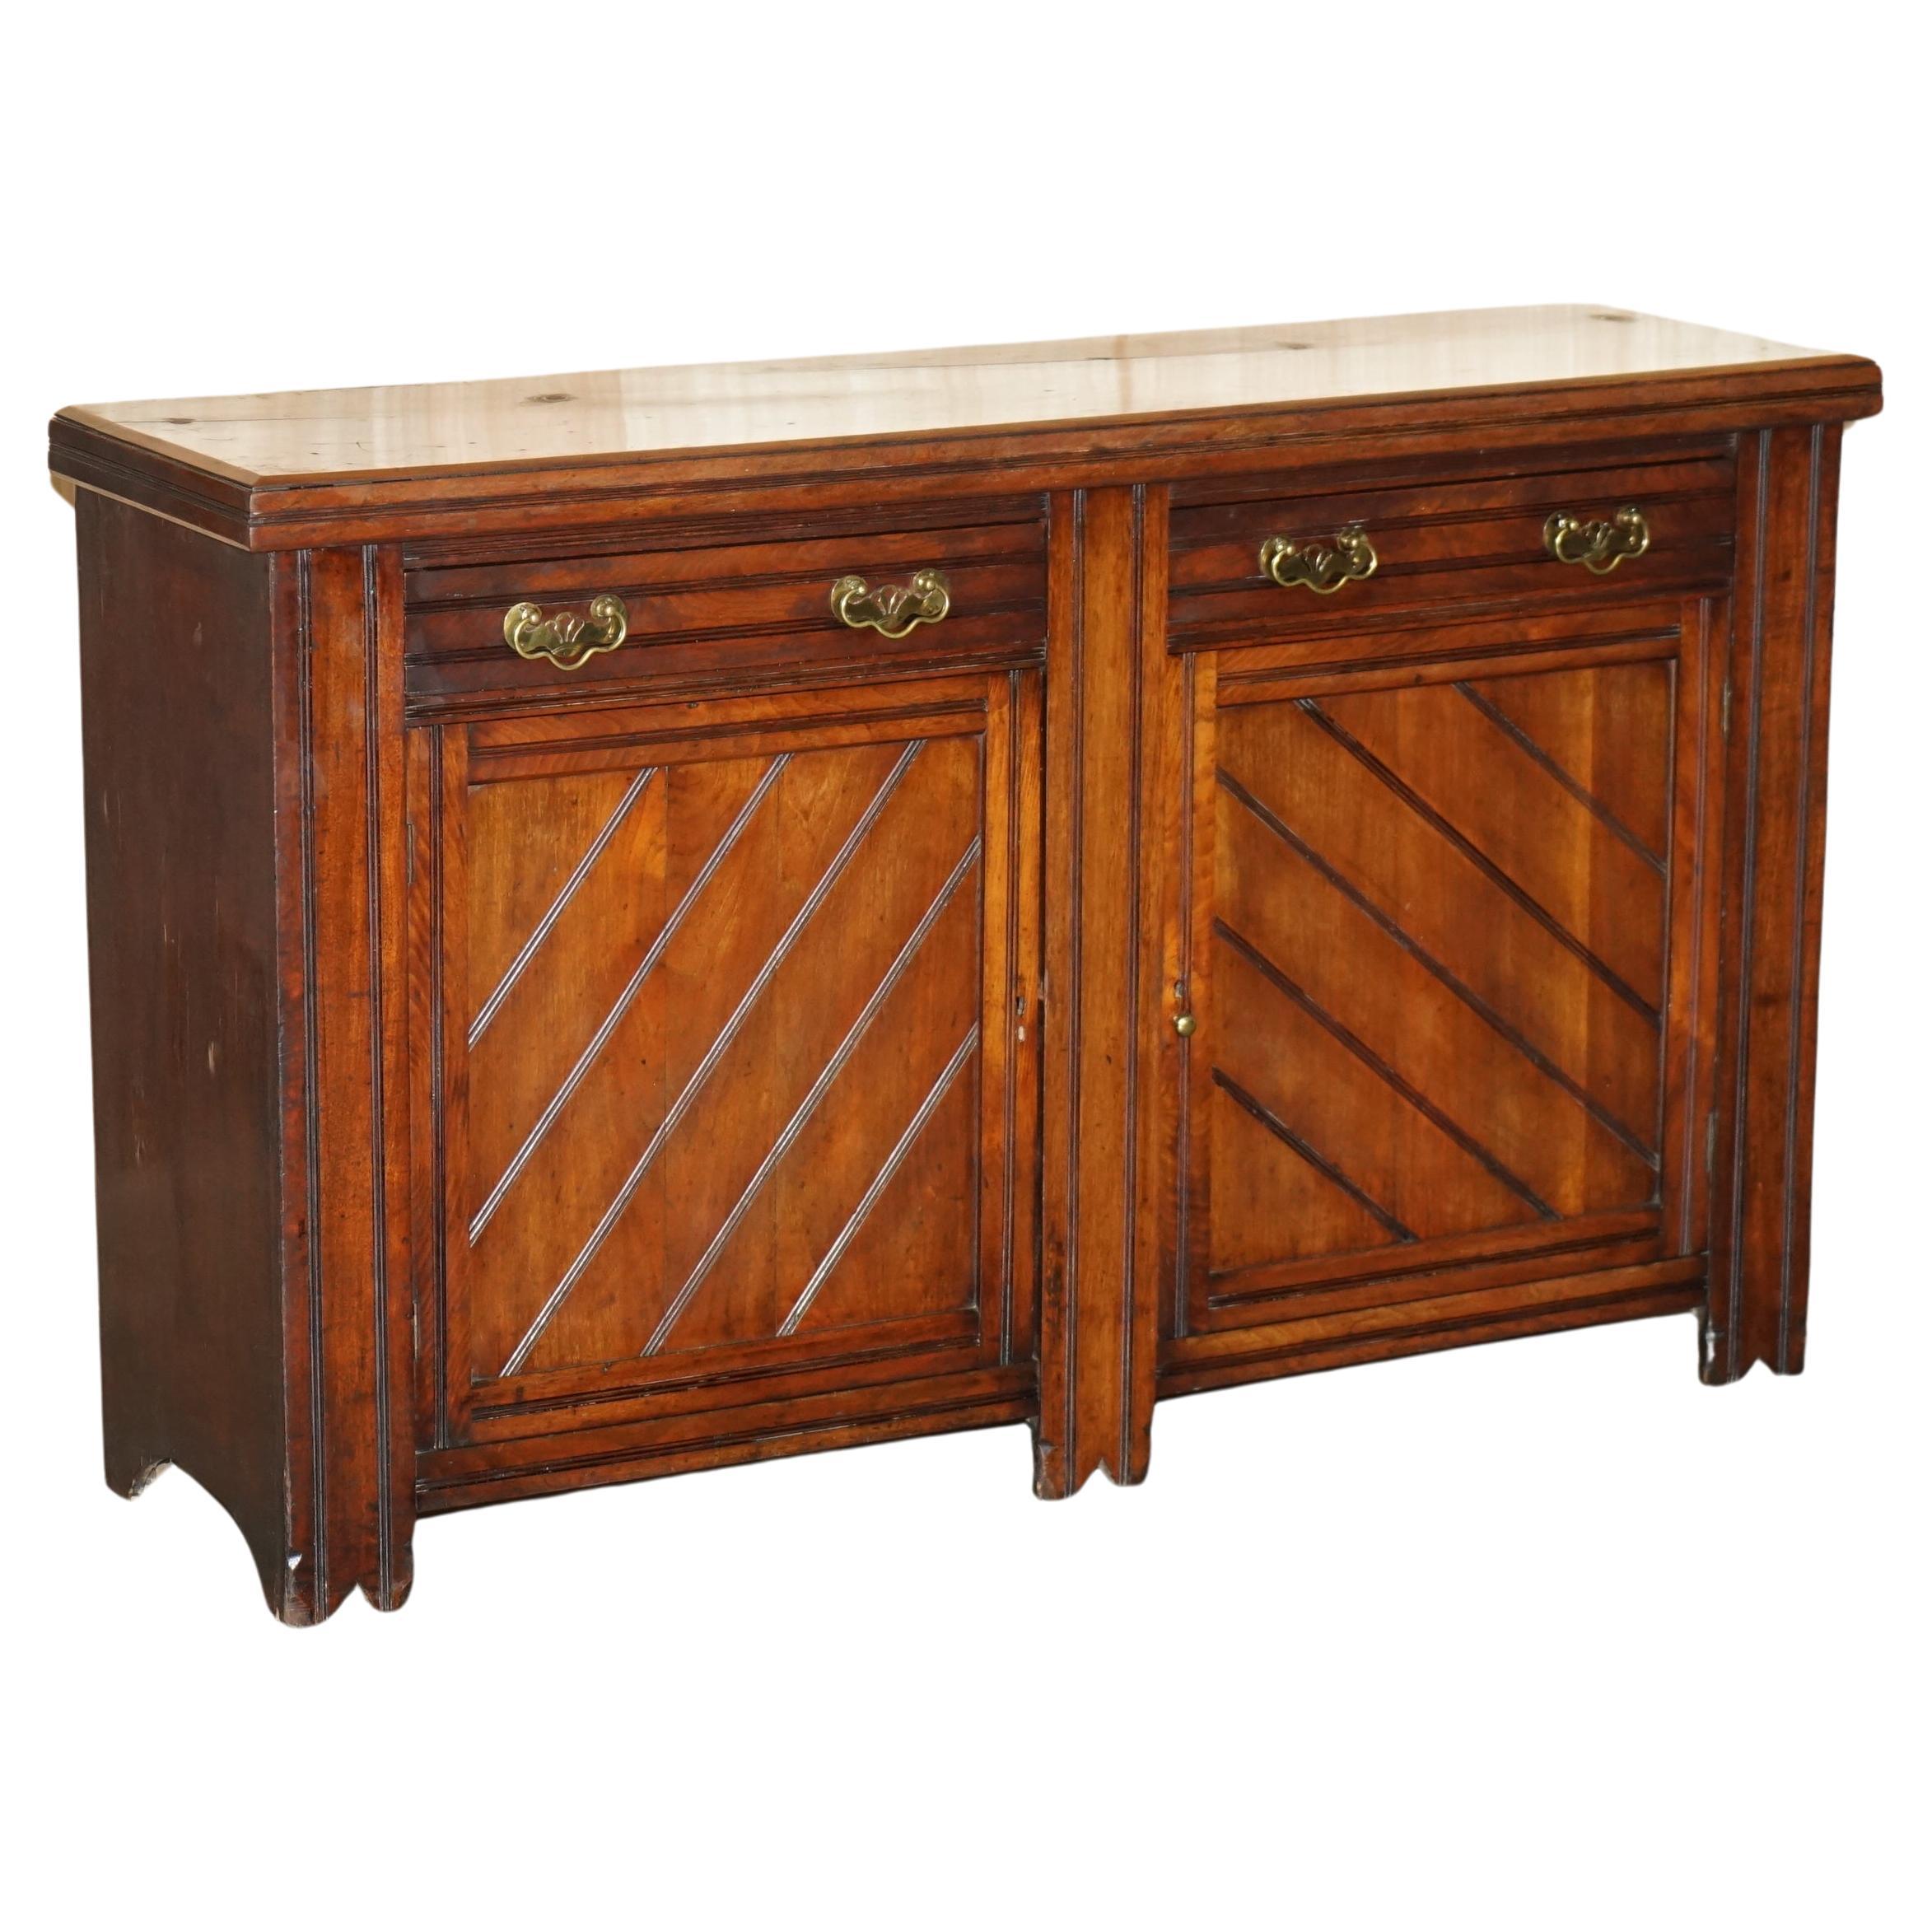 ANTIQUE ENGLISH COUNTRY OAK CiRCA 1880 VICTORIAN SIDEBOARD BASE WITH DRAWERS For Sale